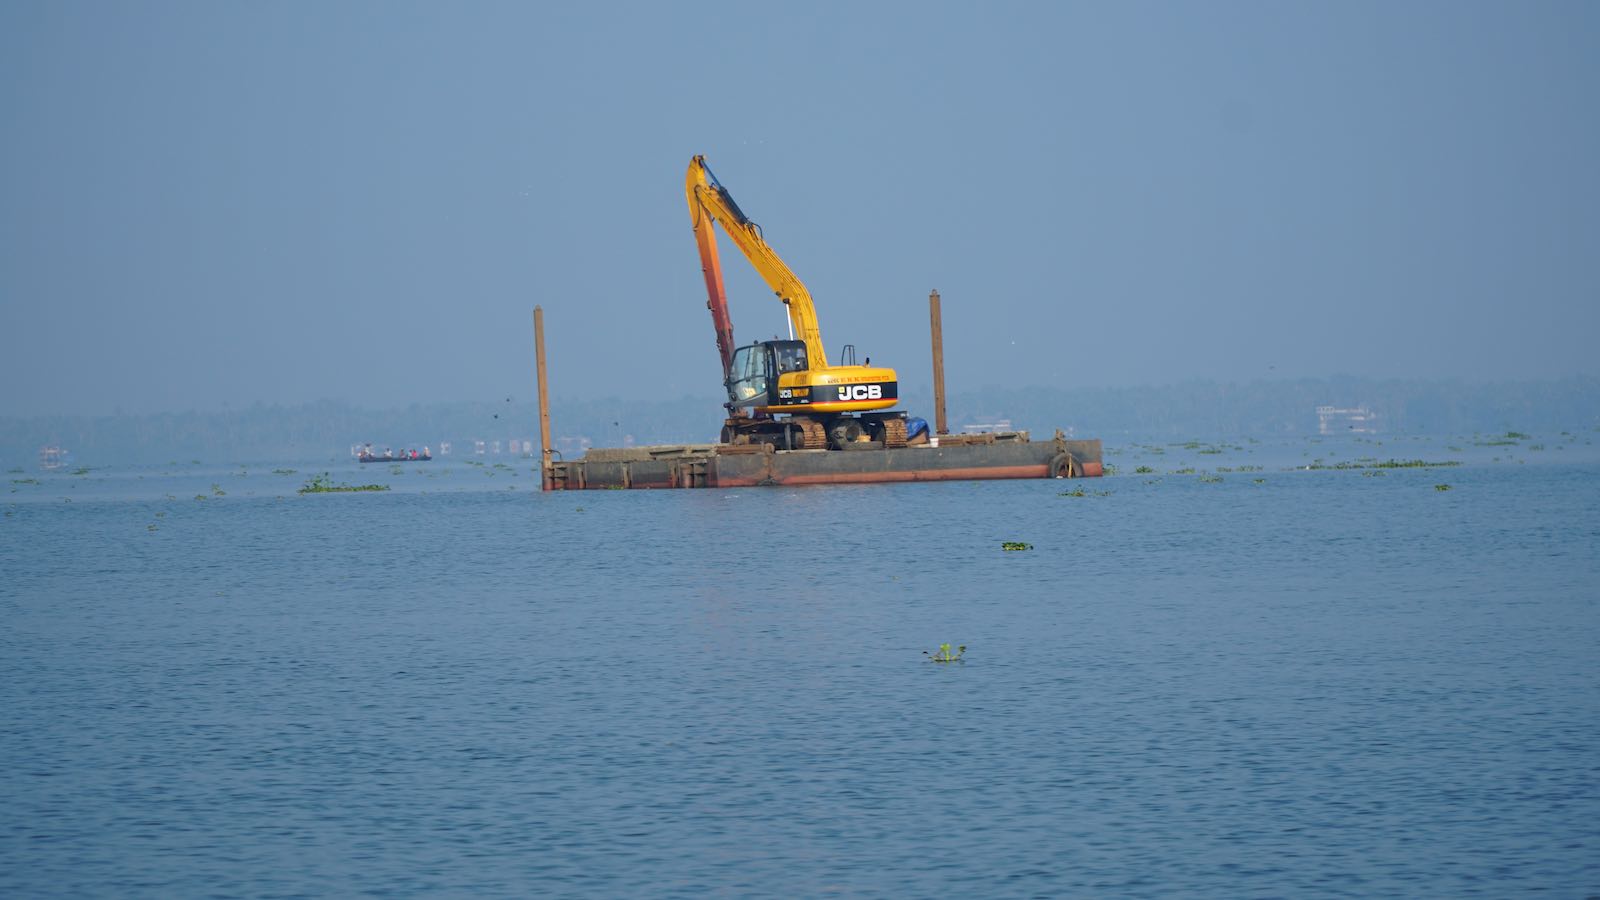 Life rarely goes exactly as planned so it's important to make sure you don't end up like this excavator I saw in the middle of a lake in India.